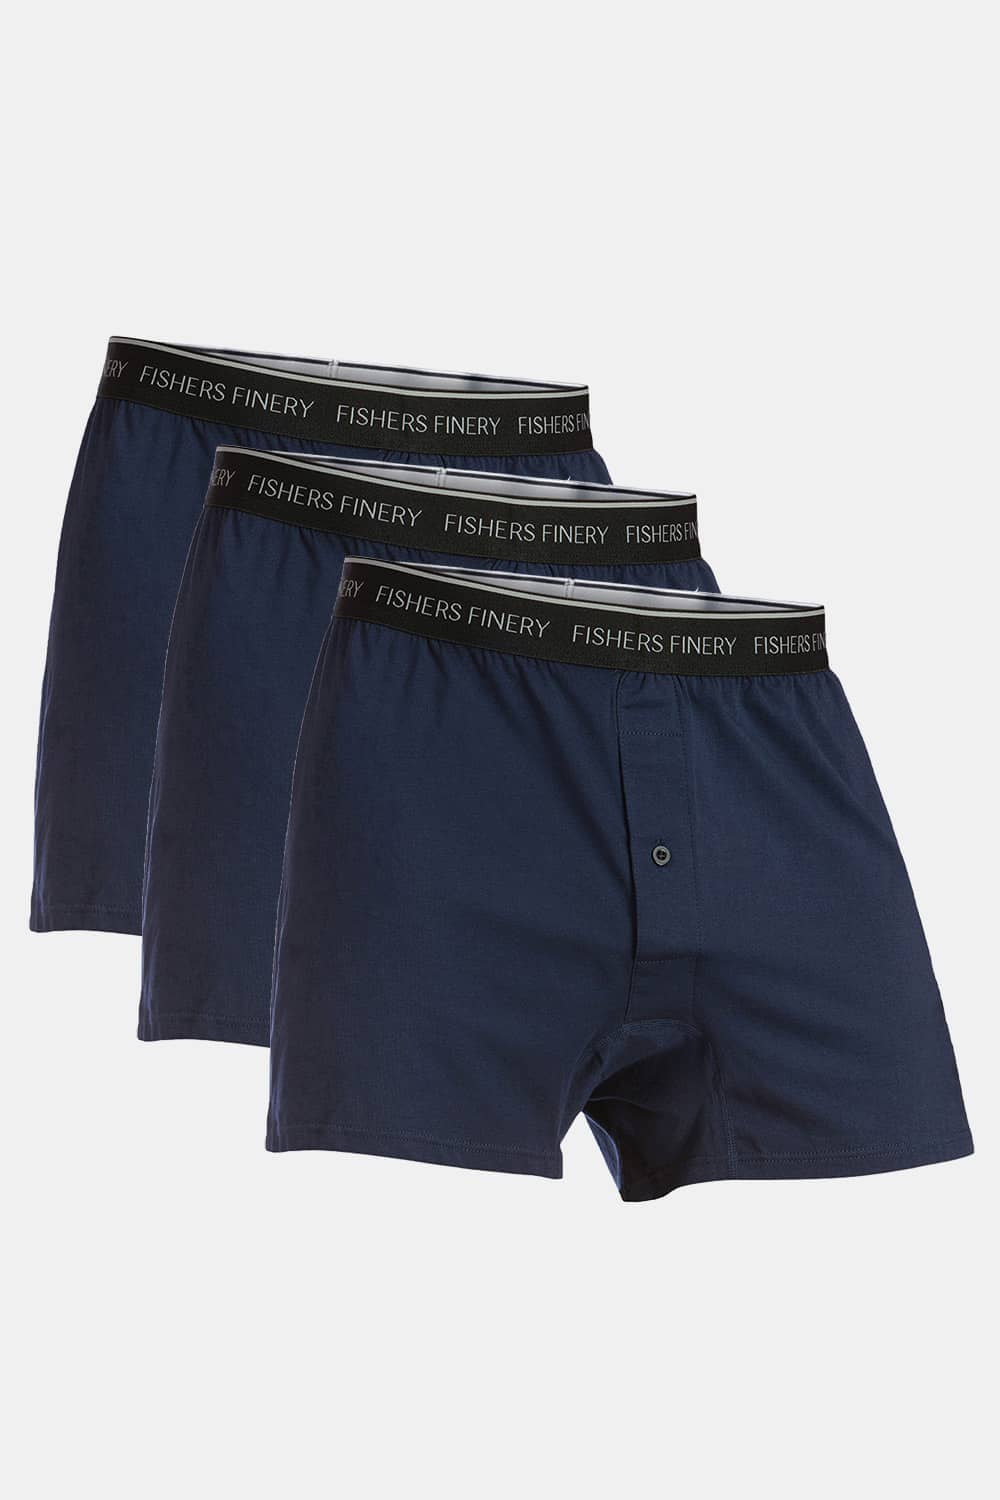 Men's Relaxed Fit Soft Knit Boxer - Multi Pack Options Mens>Underwear Fishers Finery Navy Small 3 Pack